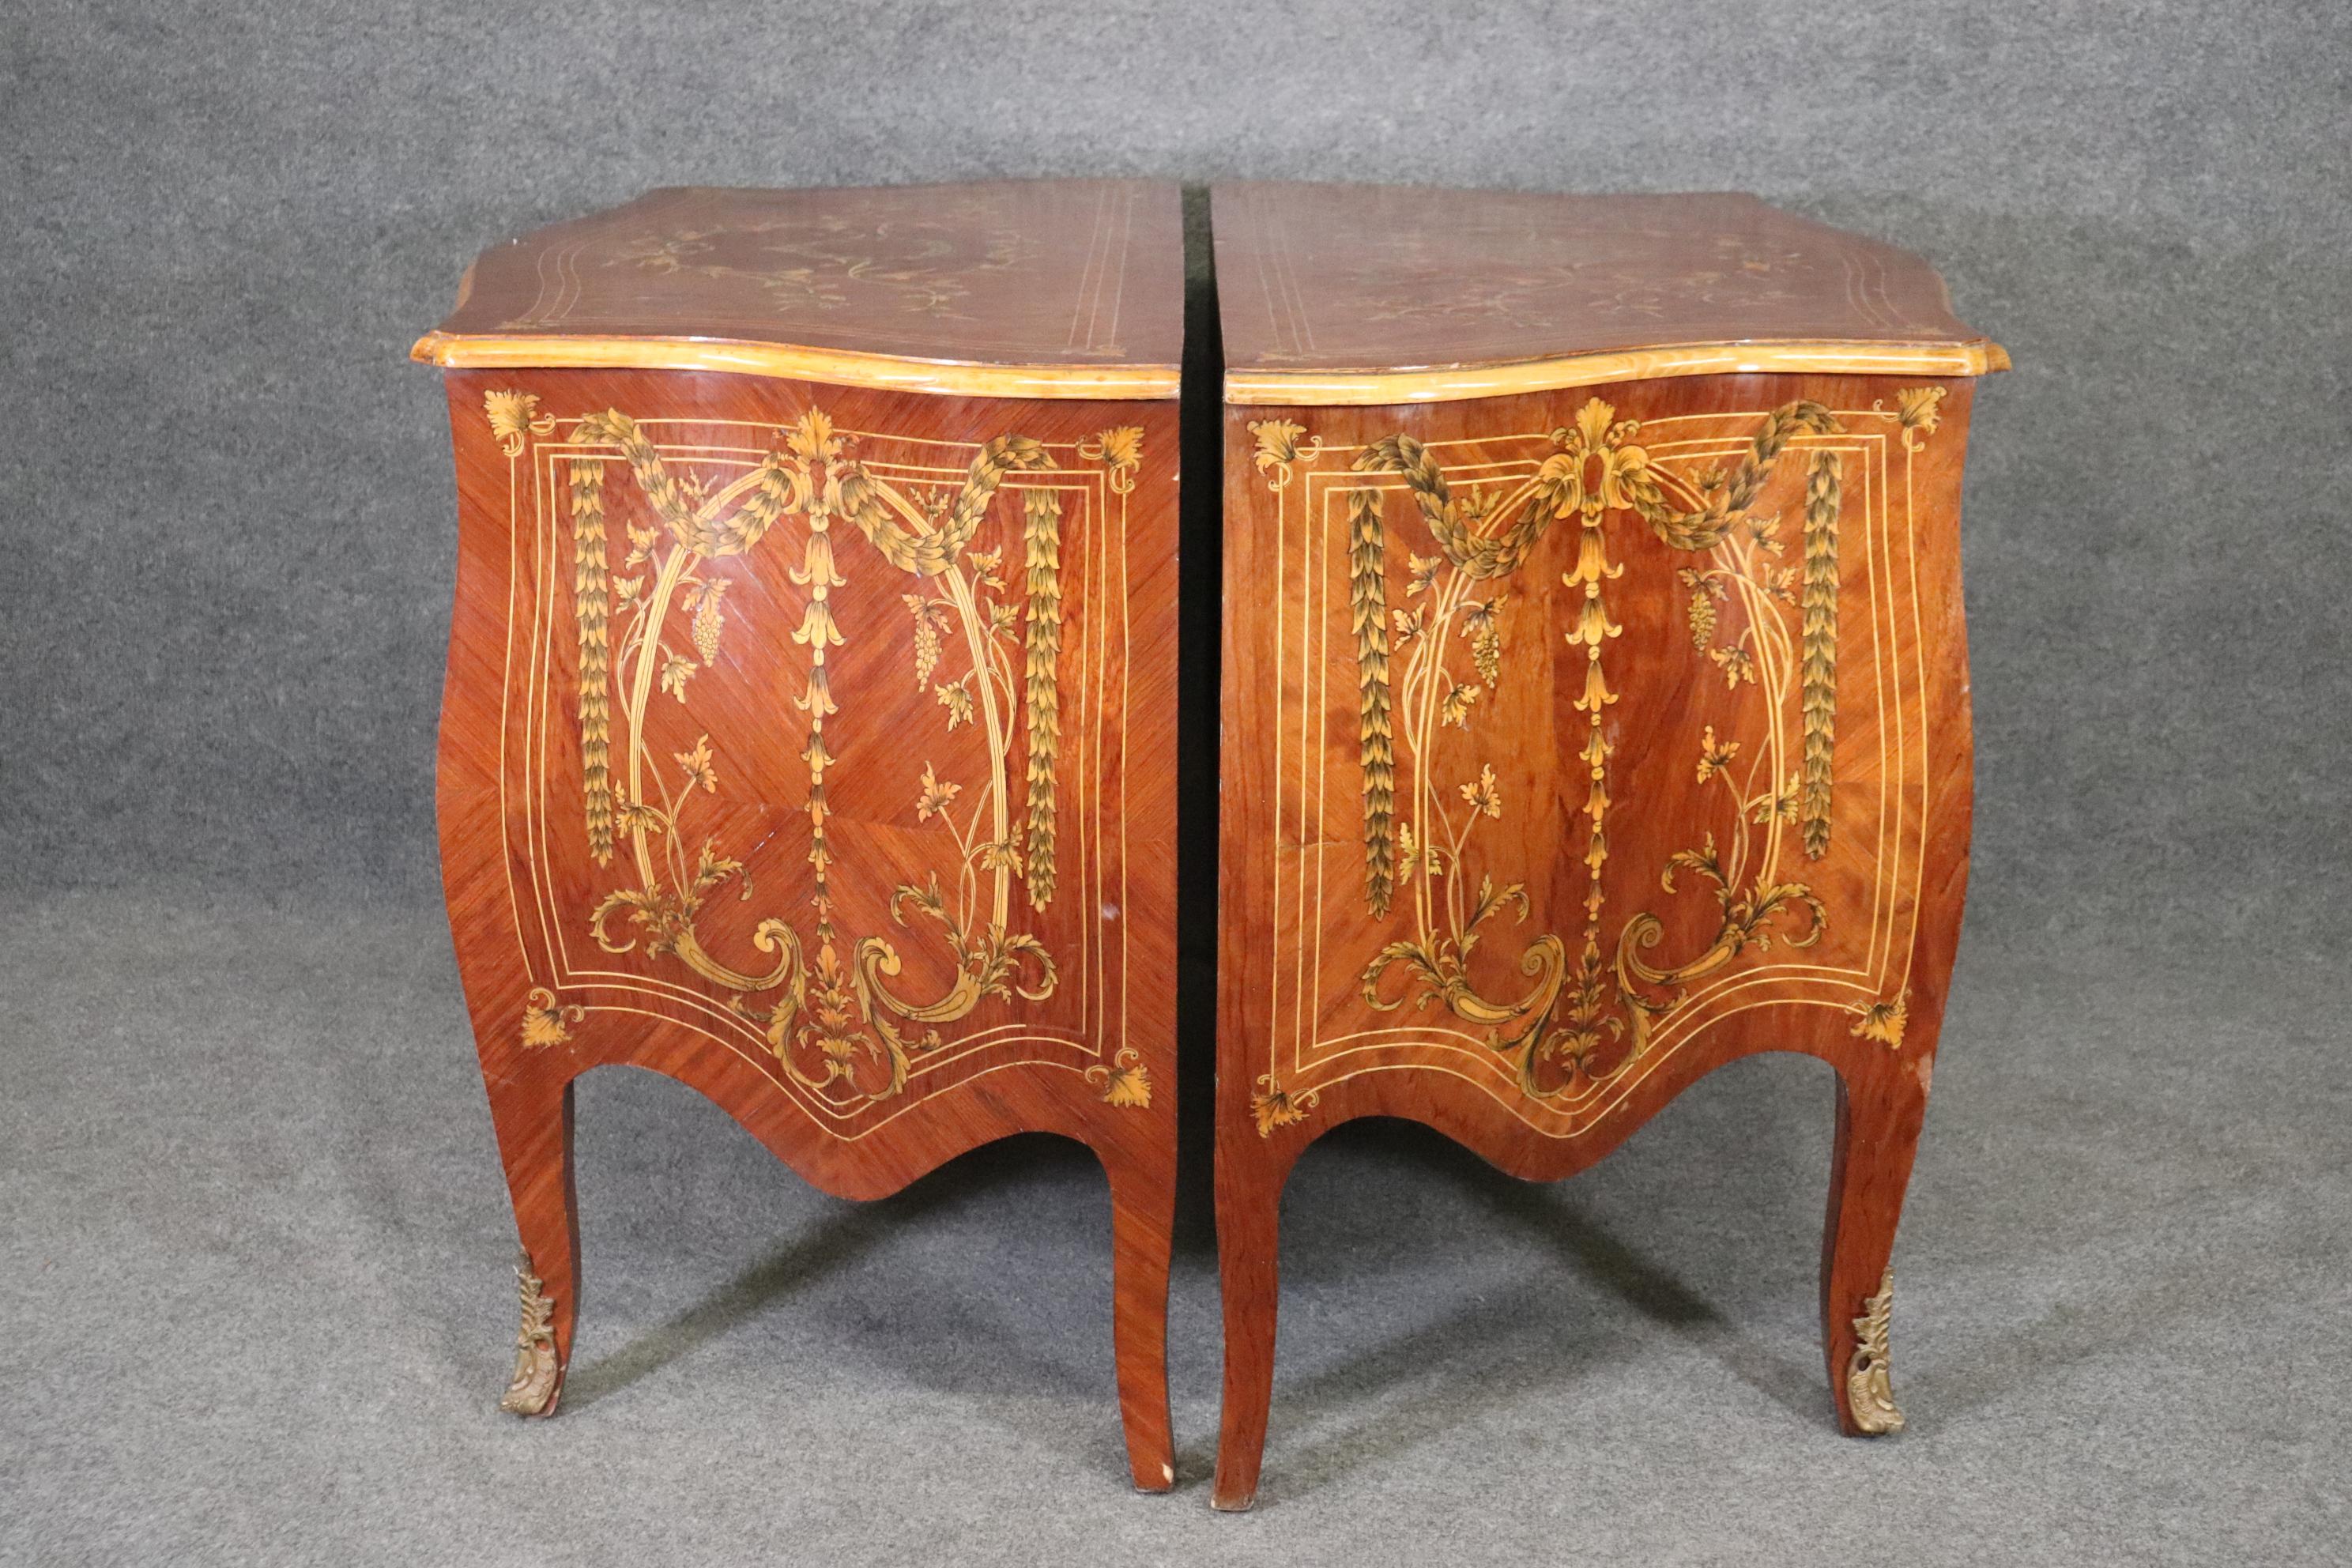 Kingwood Pair Large Scale Italian Maggiolini Inlaid Bombe Louis XV Commodes For Sale